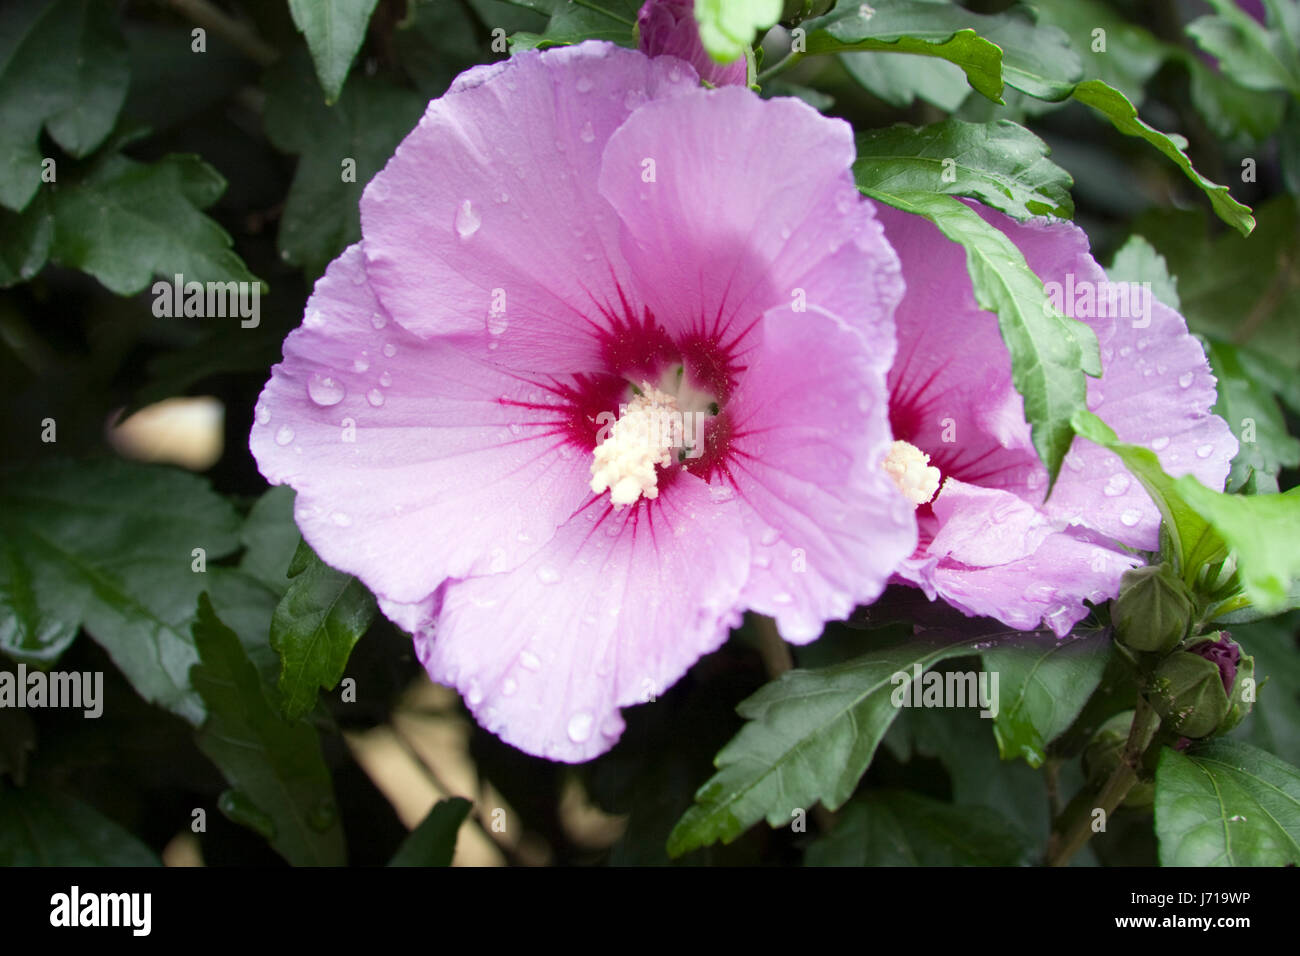 hibiscus food aliment animal insect insects bumblebee pollen shrub hibiscus Stock Photo